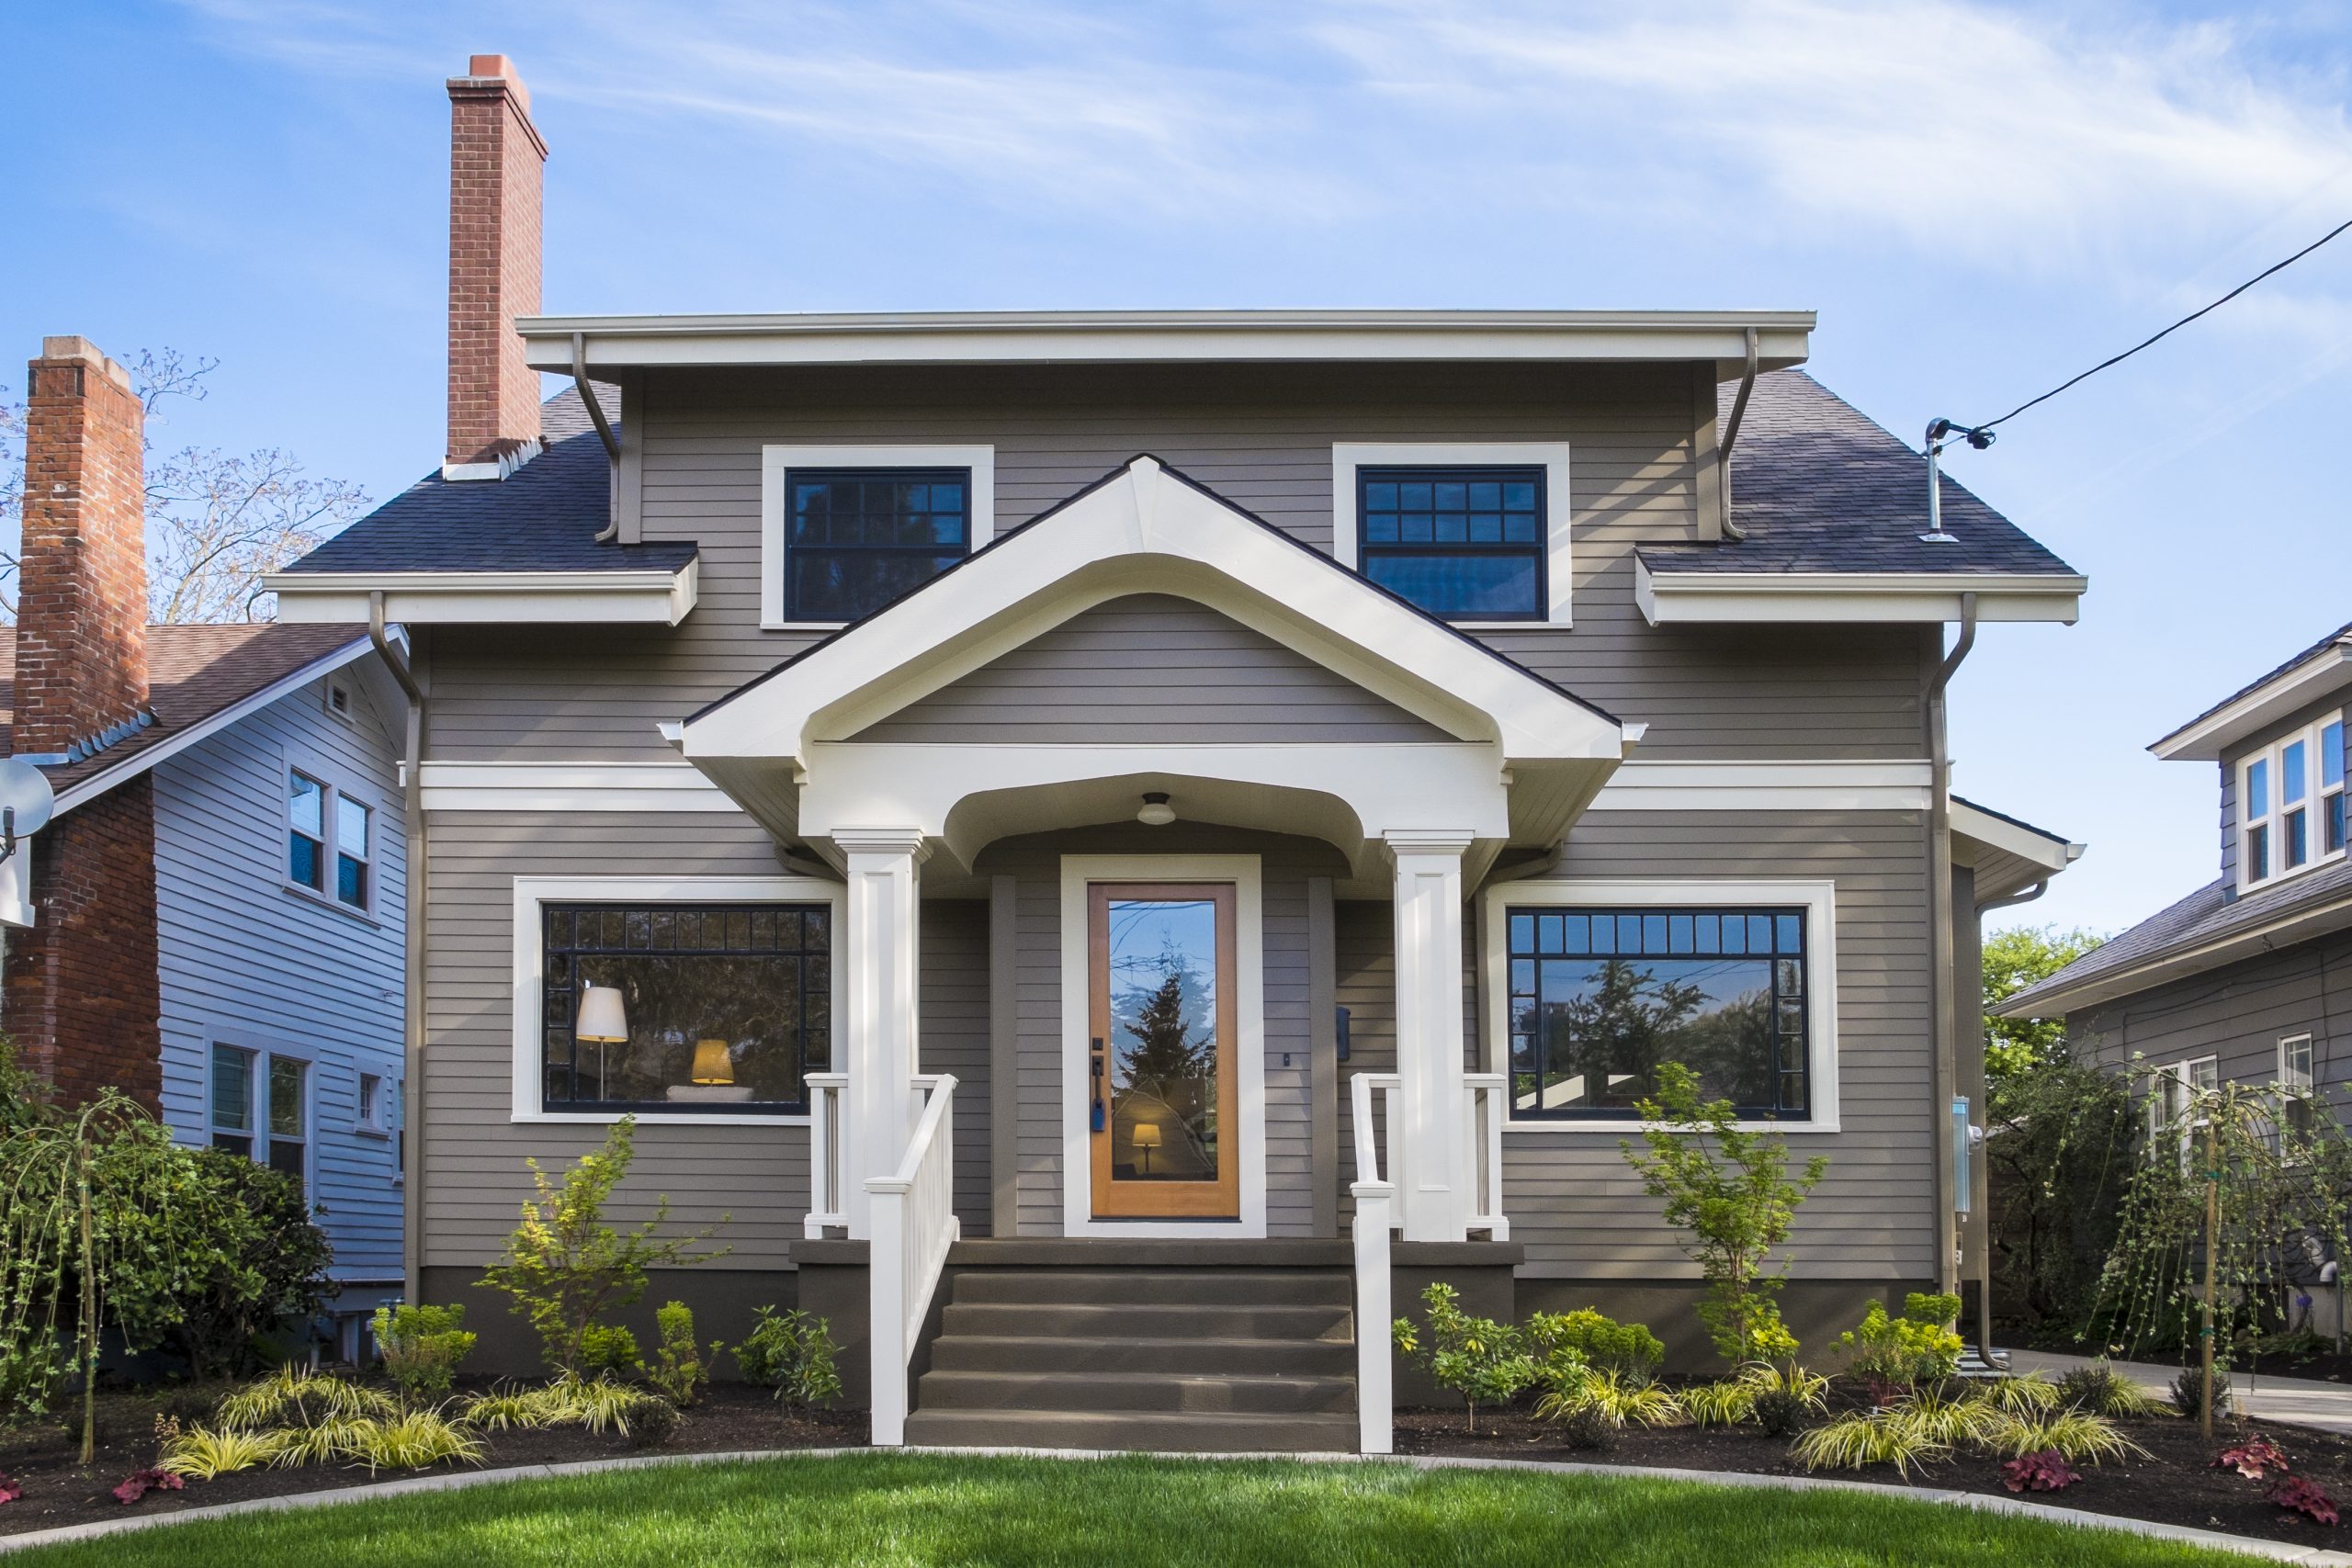 craftsman style home